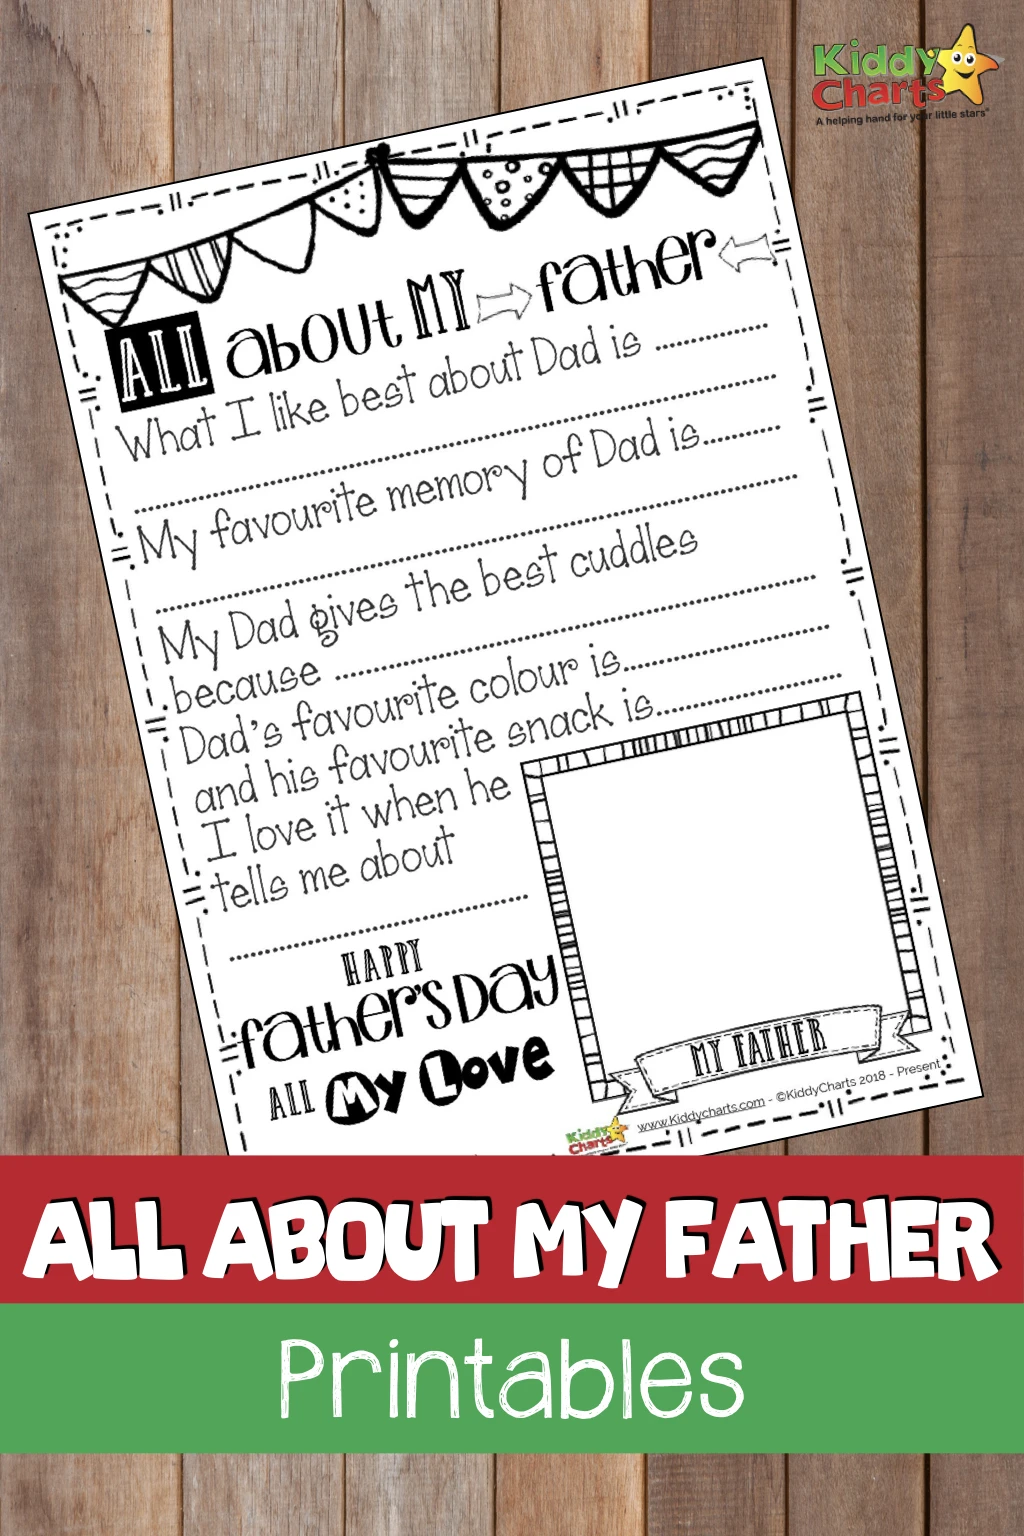 Are you looking for a great free Fathers Day gift idea? Then why not print this out, get your kids to color it in and give it to Dad?